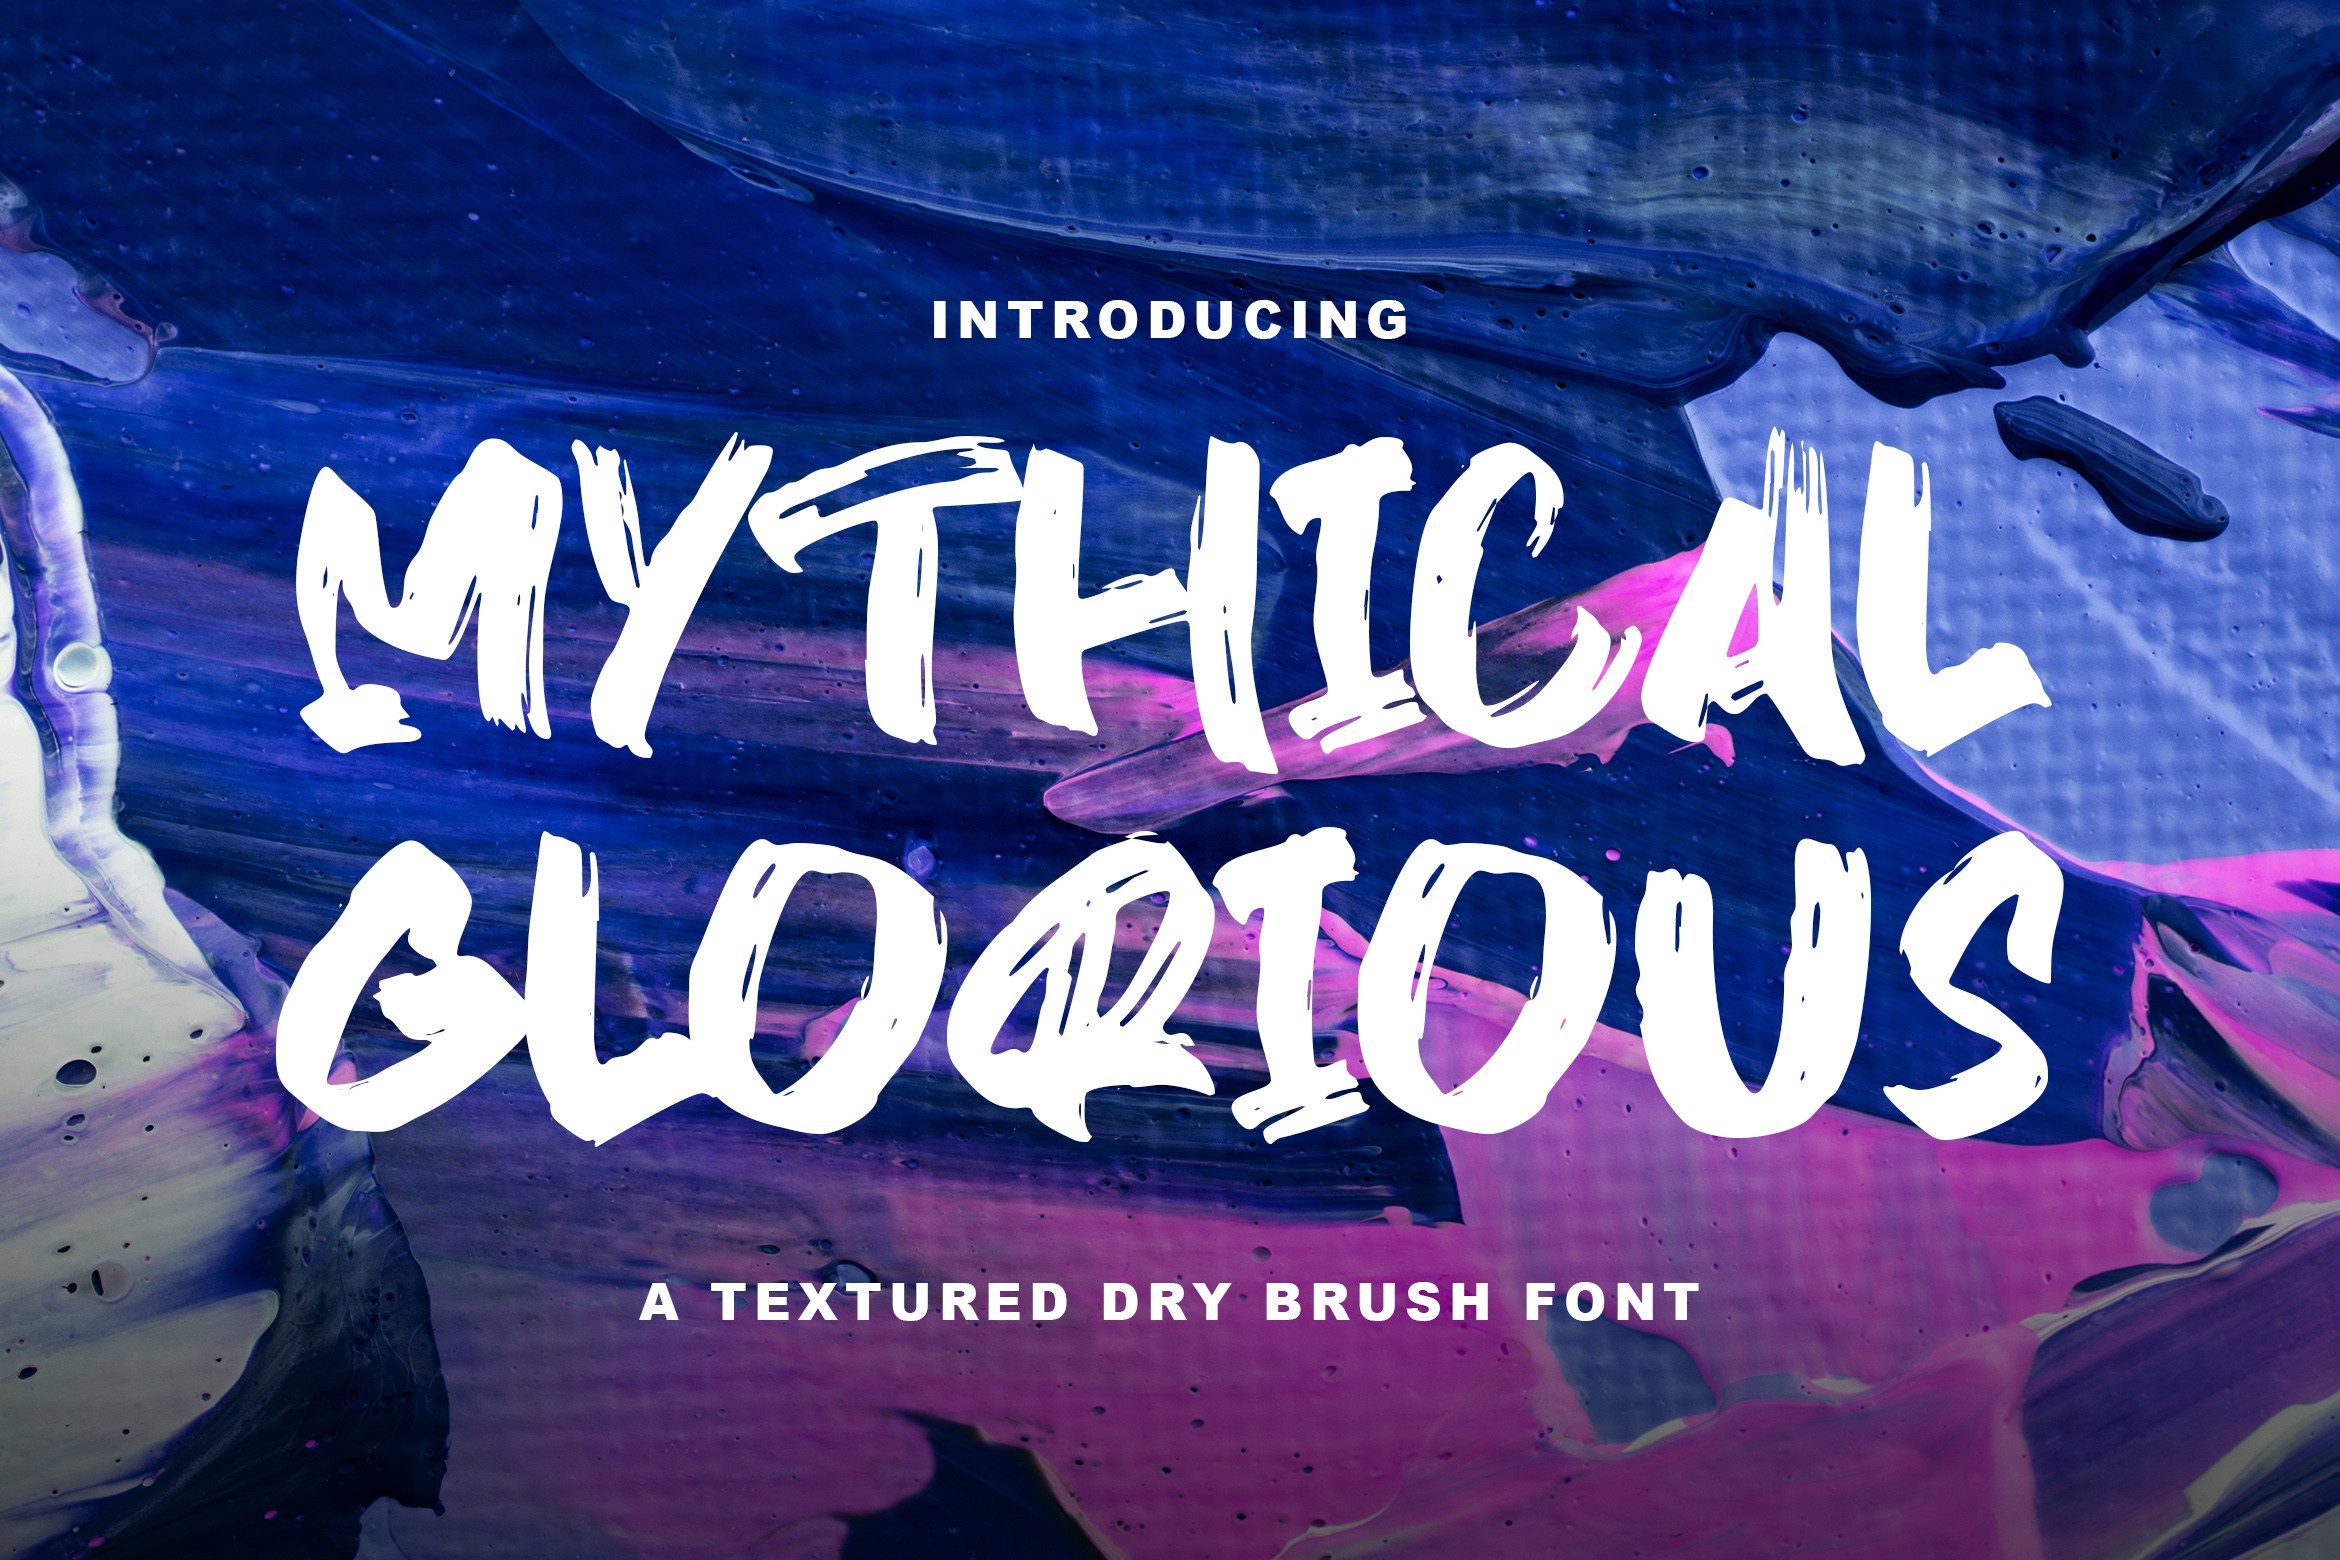 Mythical Glorious Font